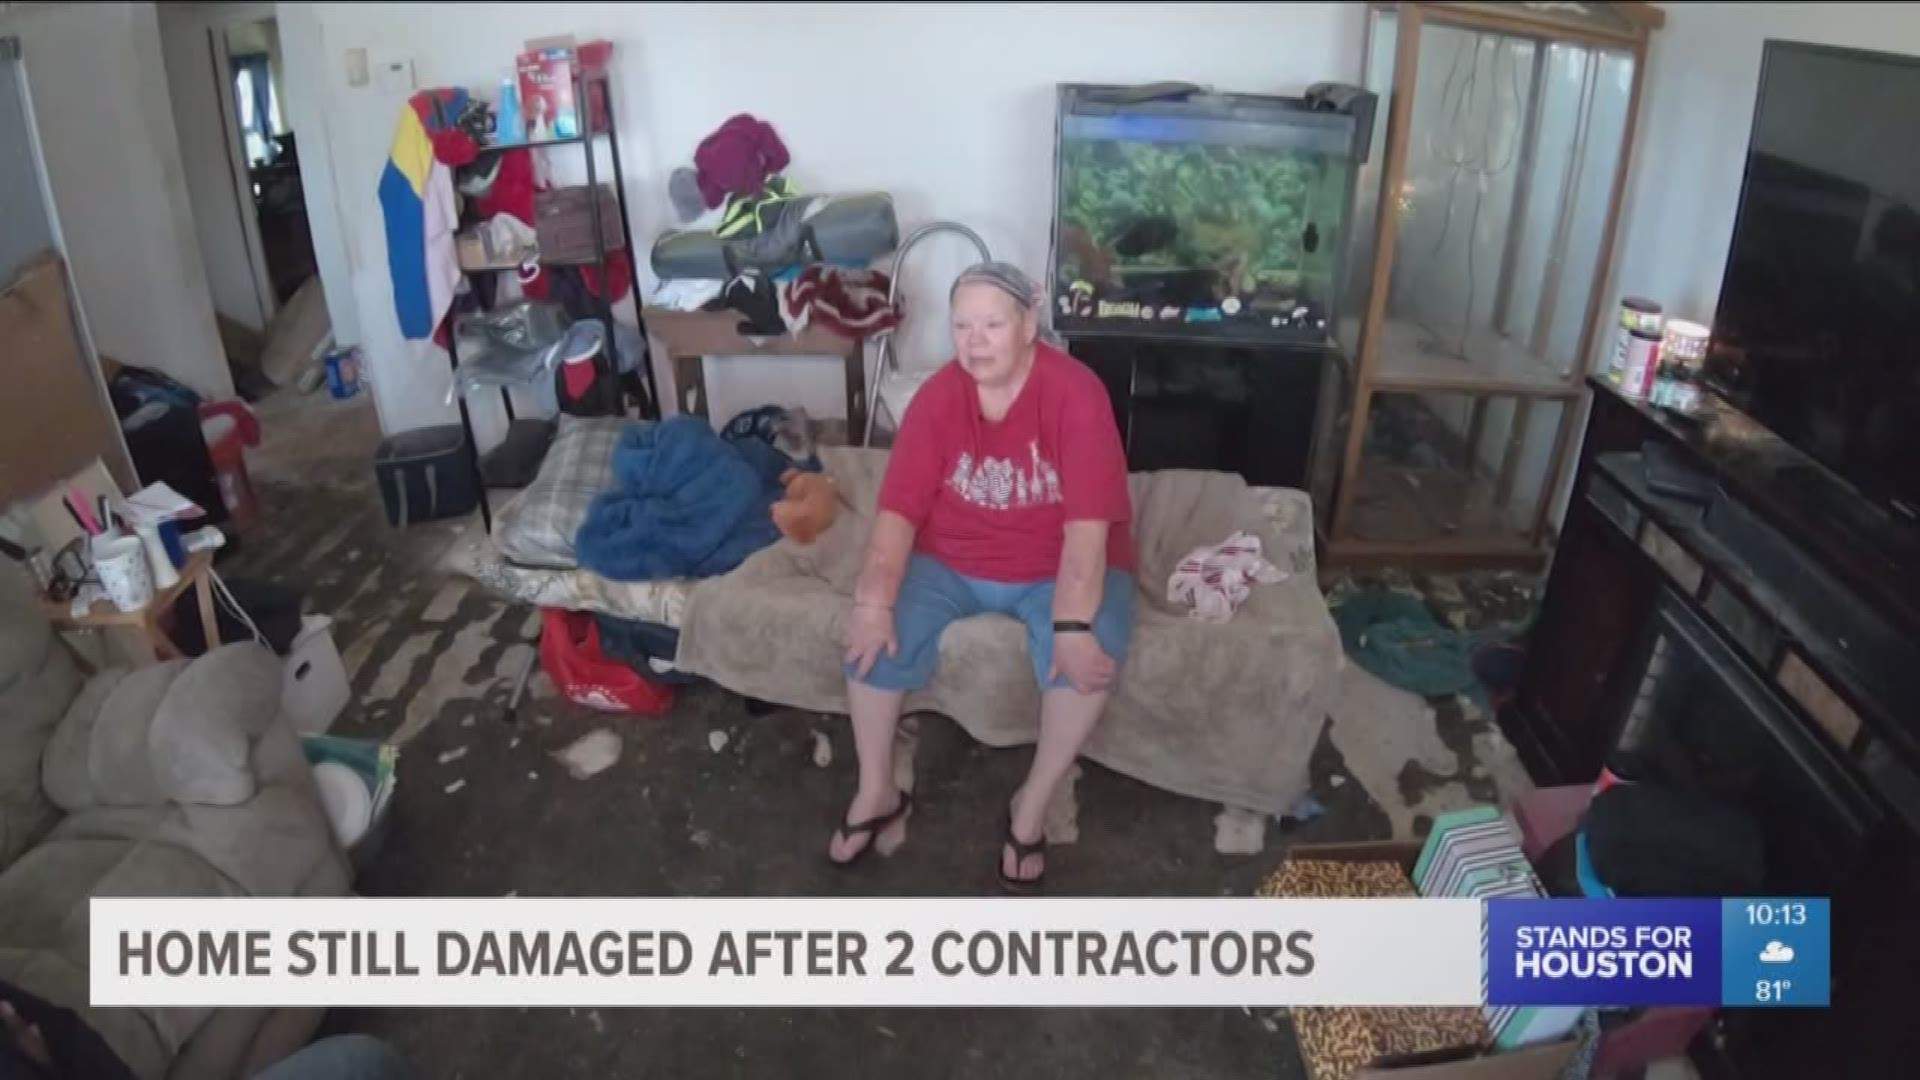 A Harvey victim says she out thousands of dollars to contractors who either did a poor job fixing up her home or didn't finish at all. Nine months later and her home still has a long way to go. 